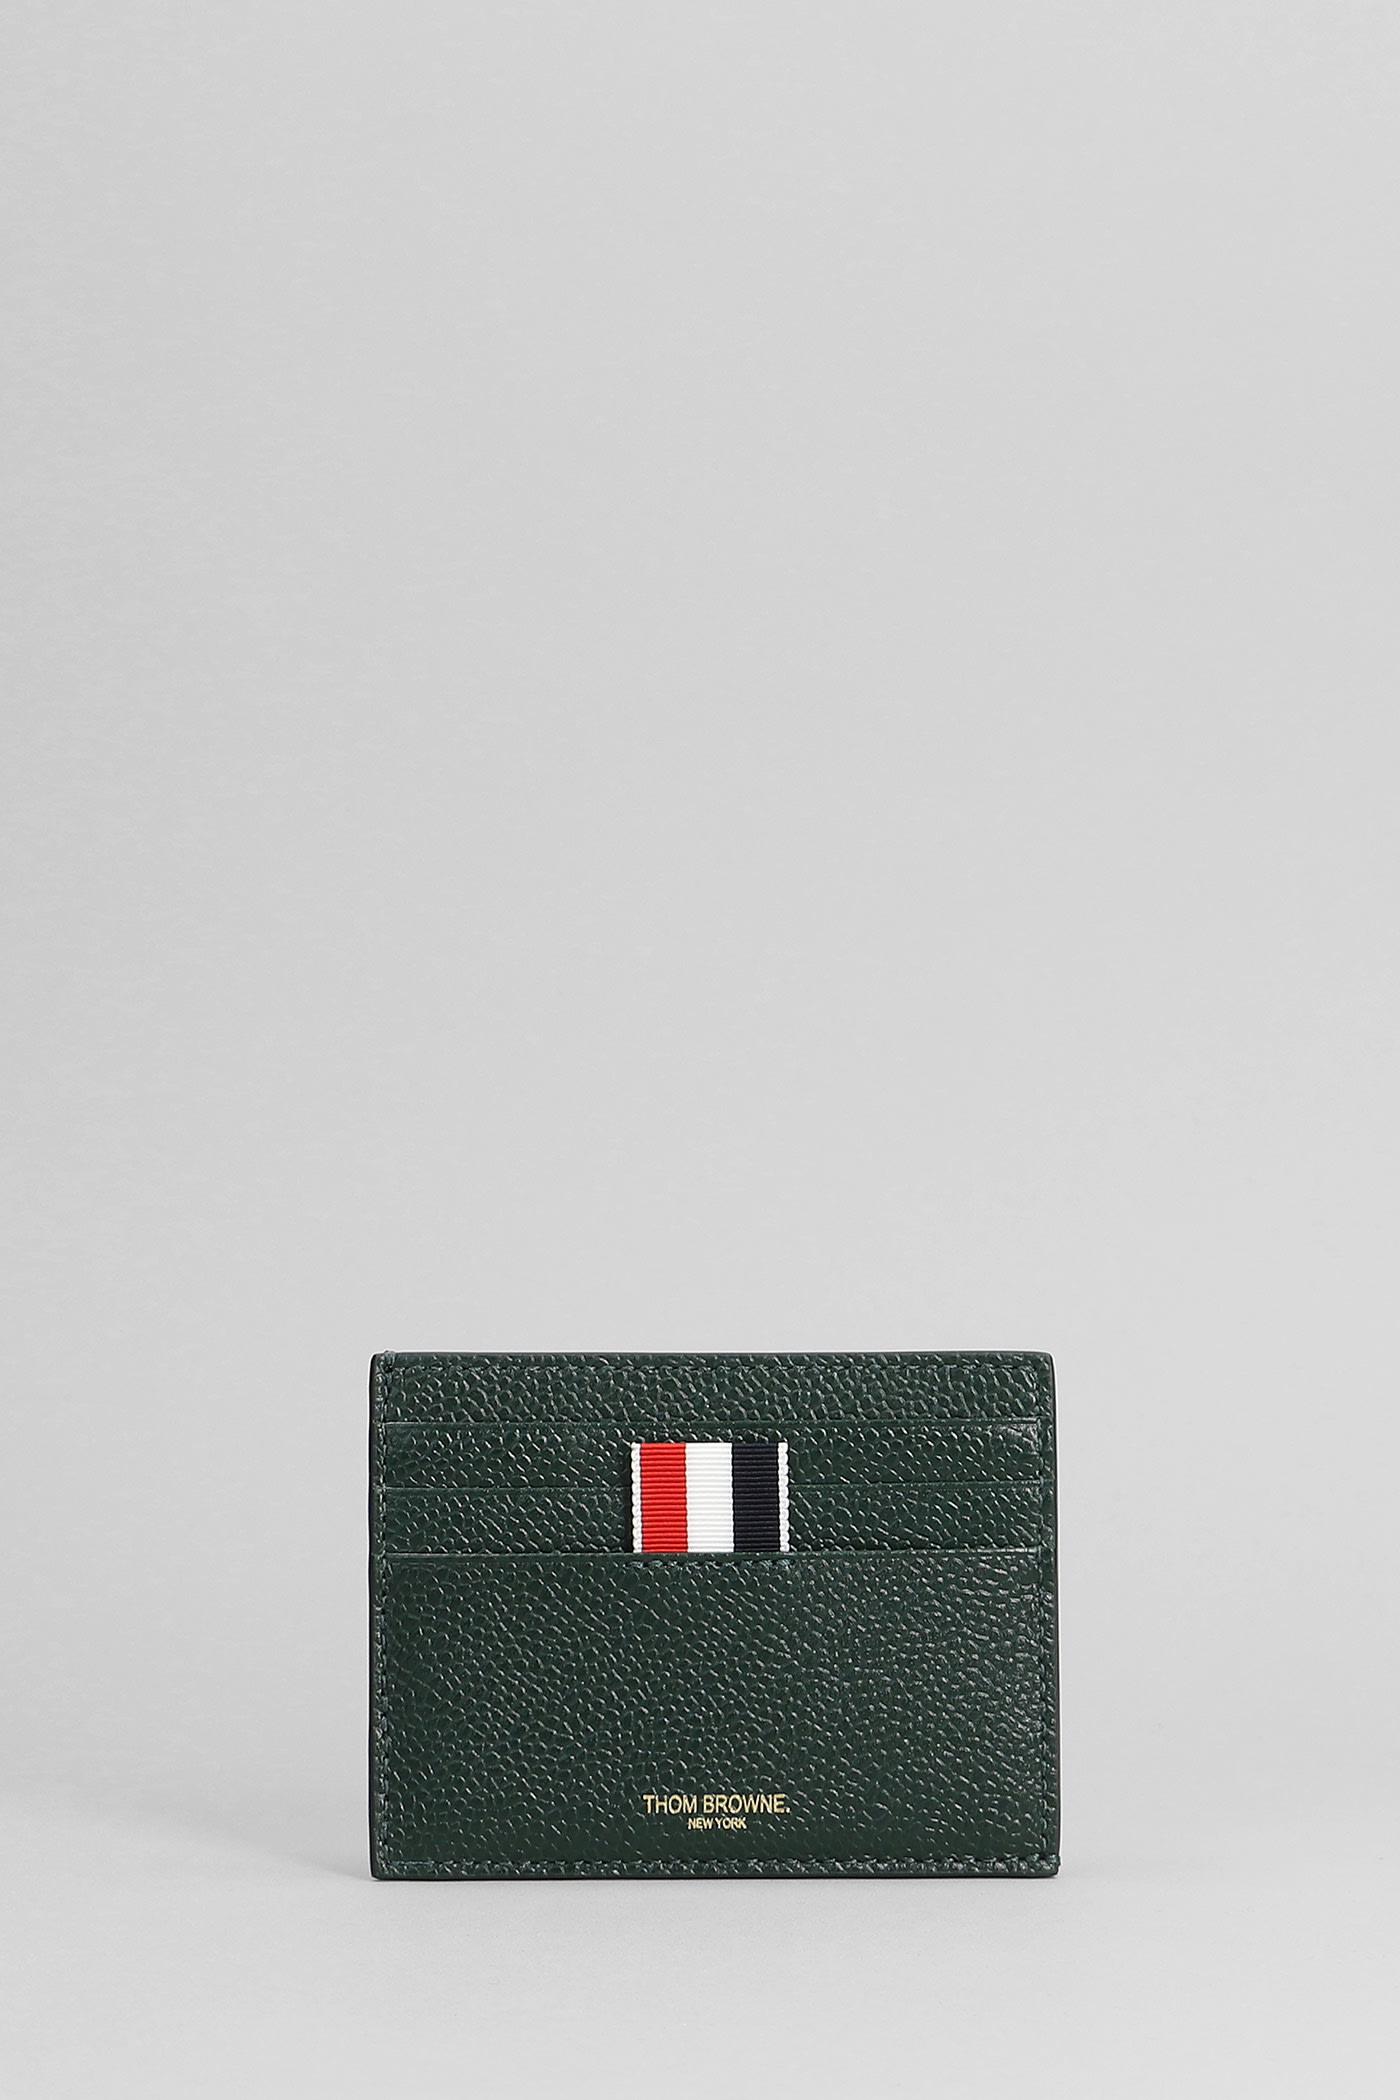 THOM BROWNE WALLET IN GREEN LEATHER